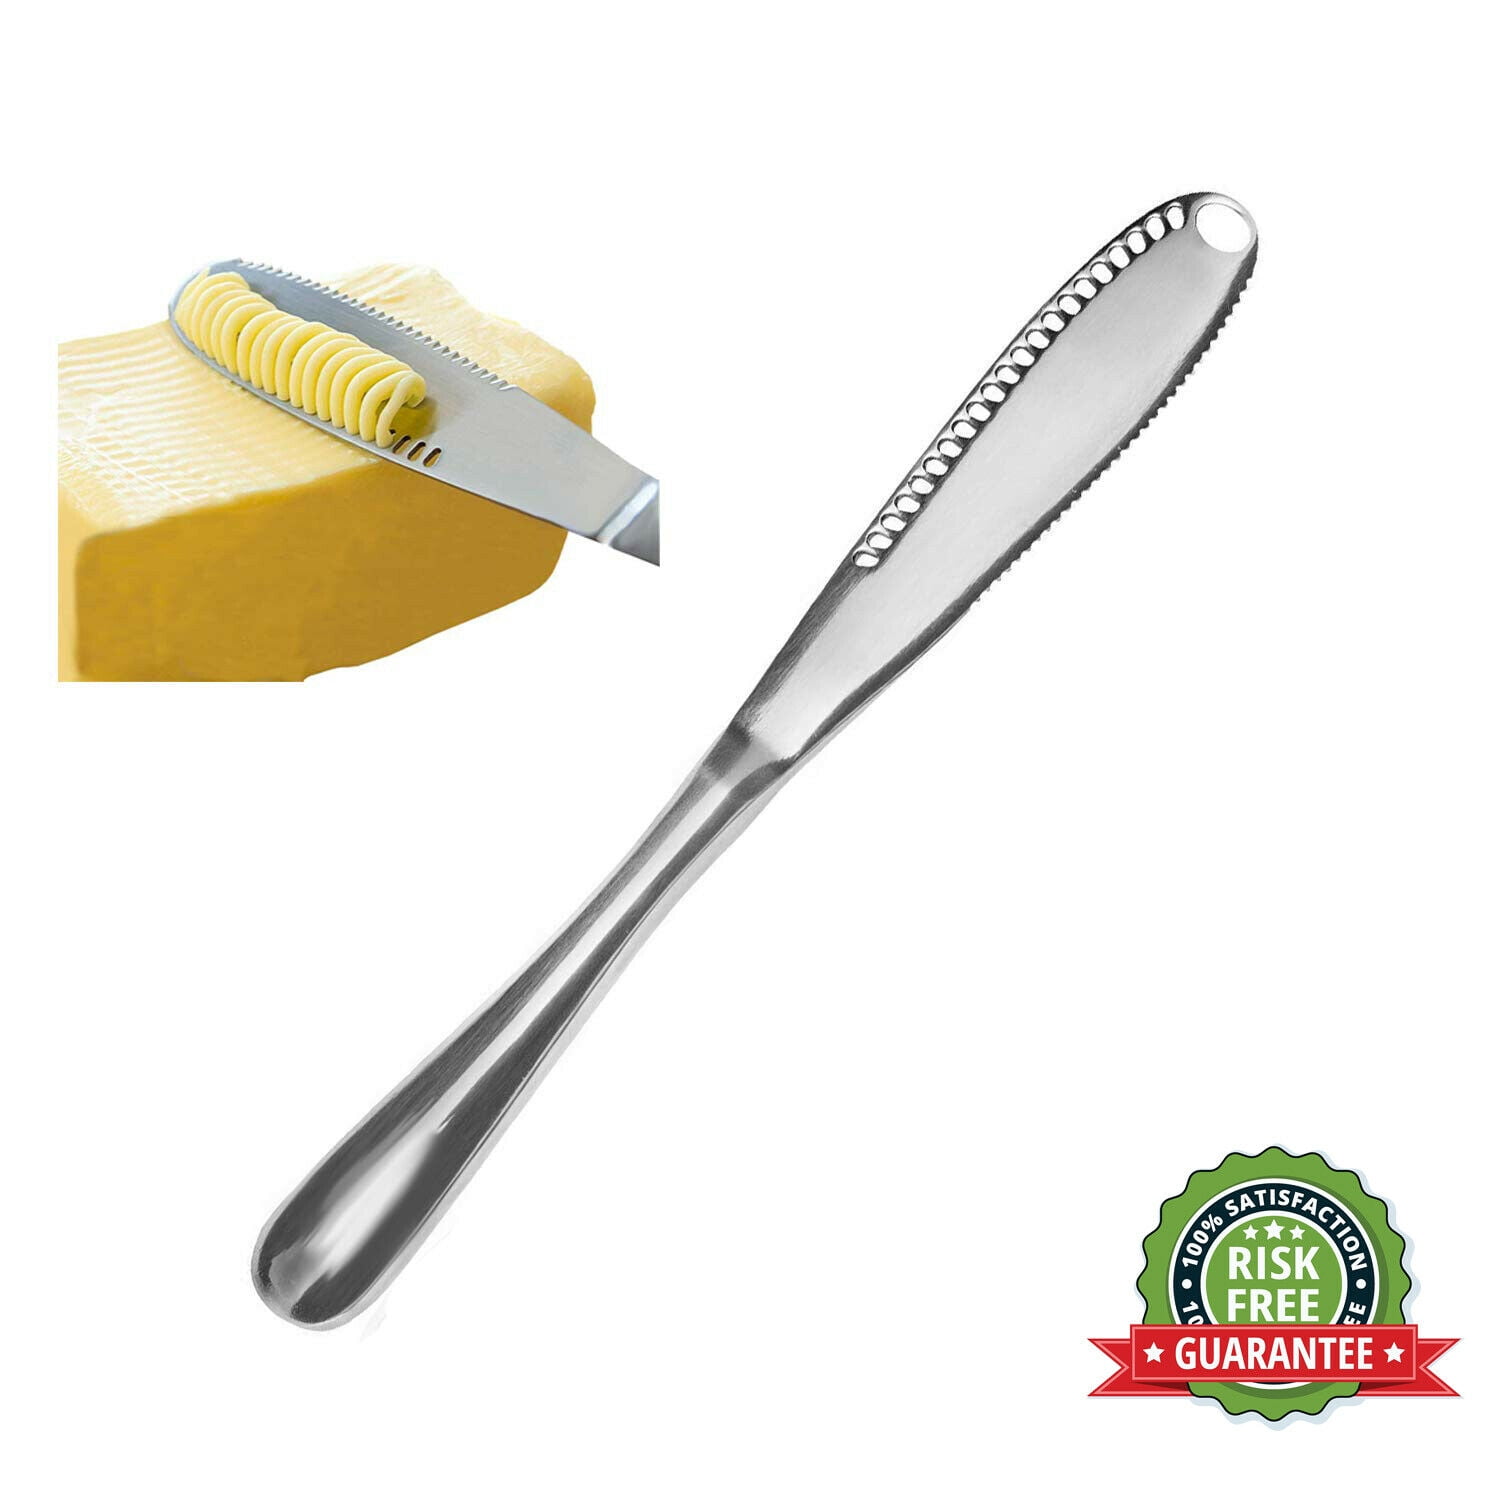 Dropship 1pc Stainless Steel Butter Knife Spreader; Kitchen Baking